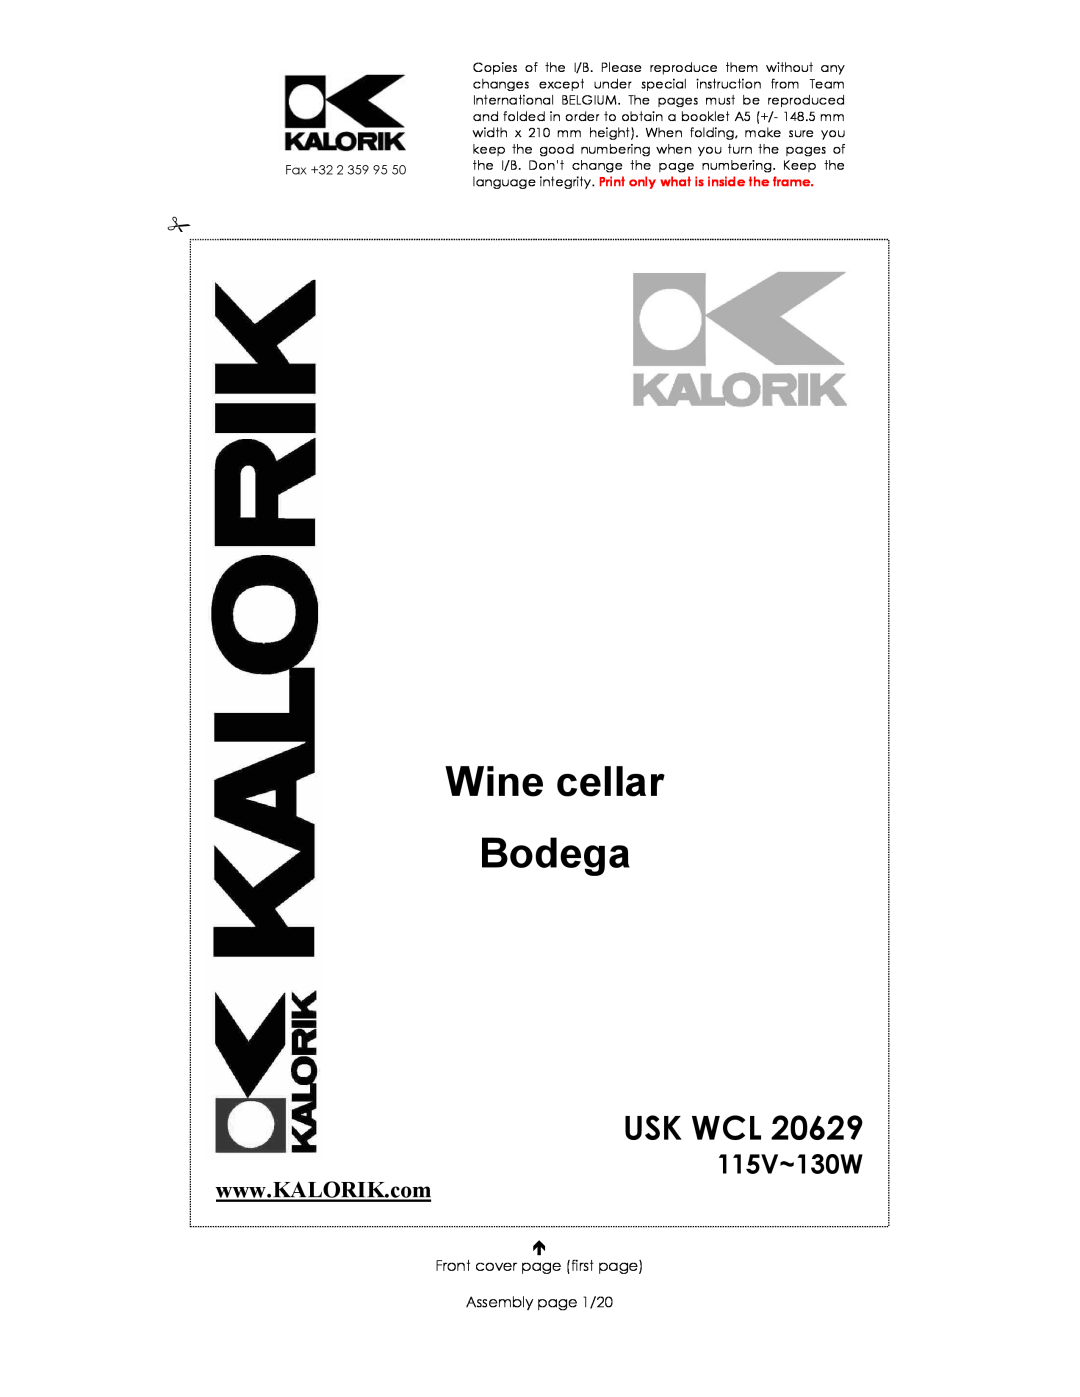 Kalorik USK WCL 20629 manual 115V~130W, Wine cellar Bodega, Usk Wcl, Front cover page first page Assembly page 1/20 